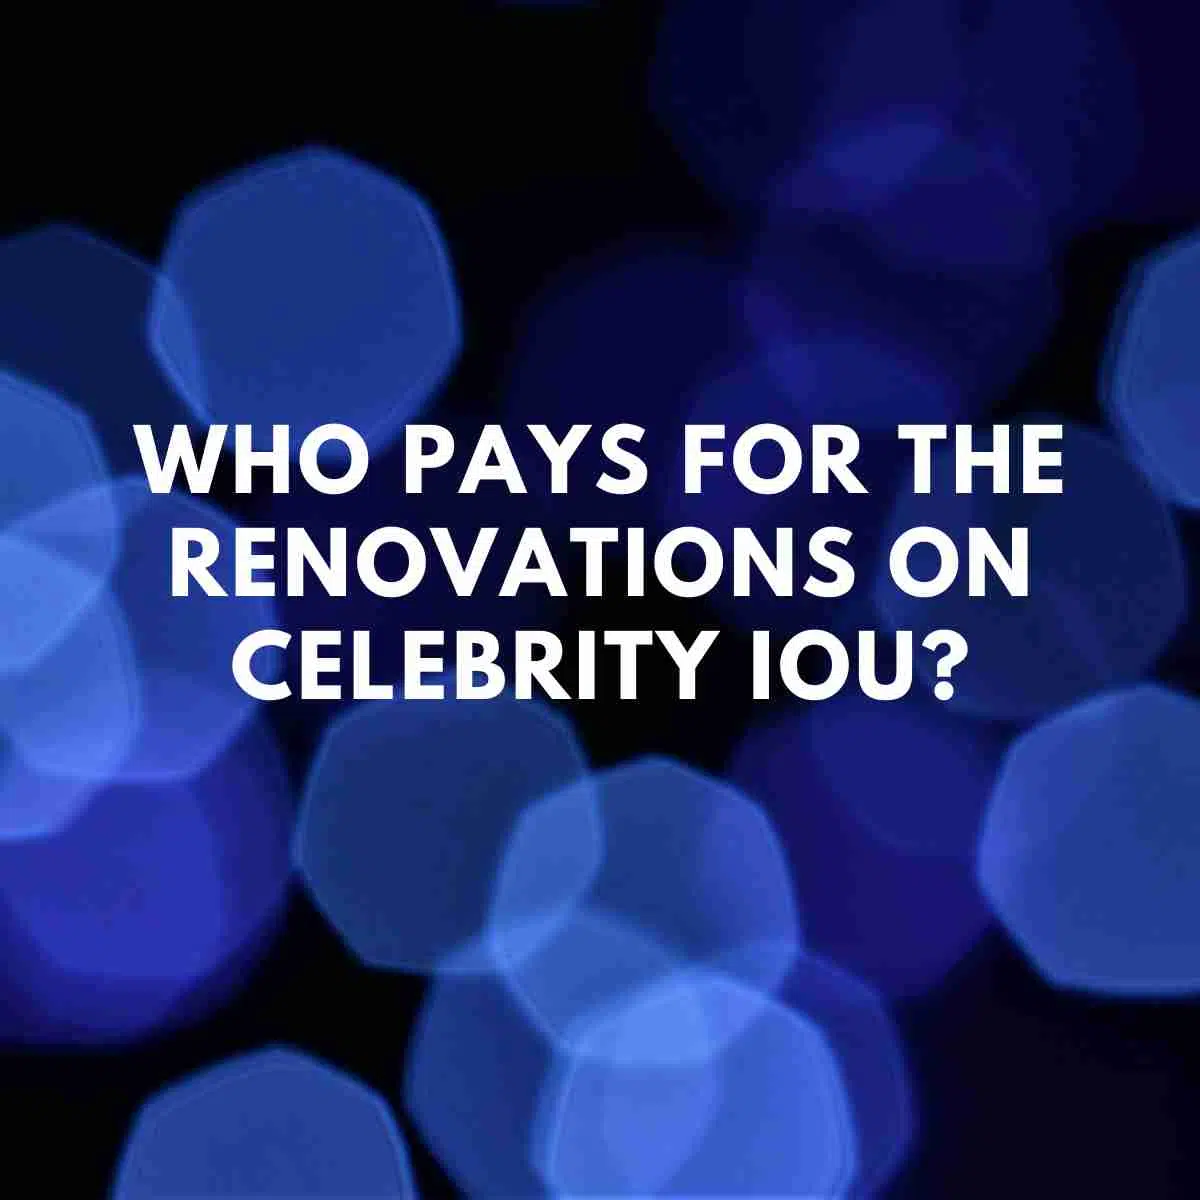 Who pays for the renovations on Celebrity IOU